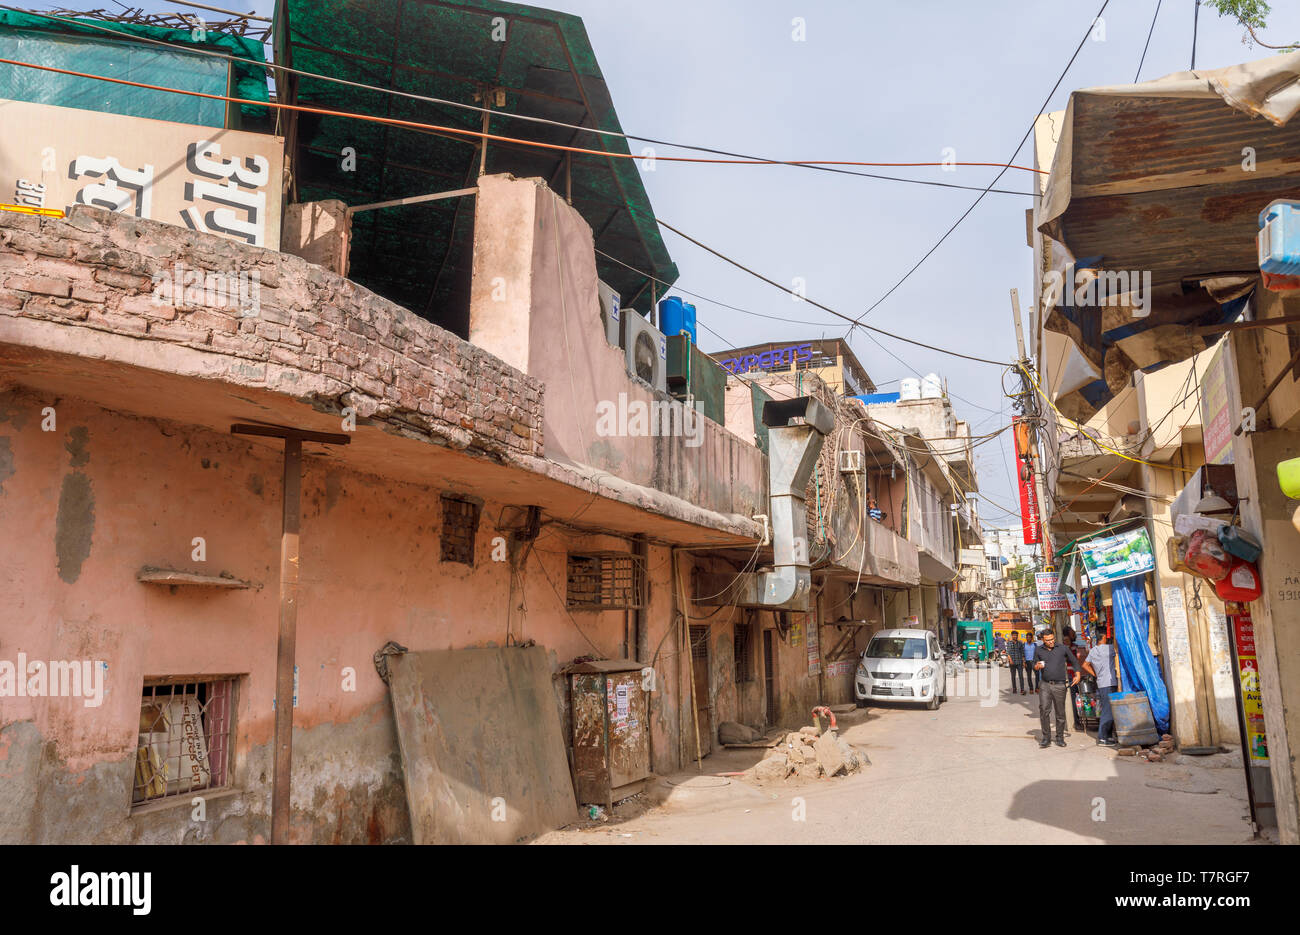 Street scene in Mahipalpur district, a suburb near Delhi Airport in New Delhi, capital city of India with typical dilapidated buildings Stock Photo